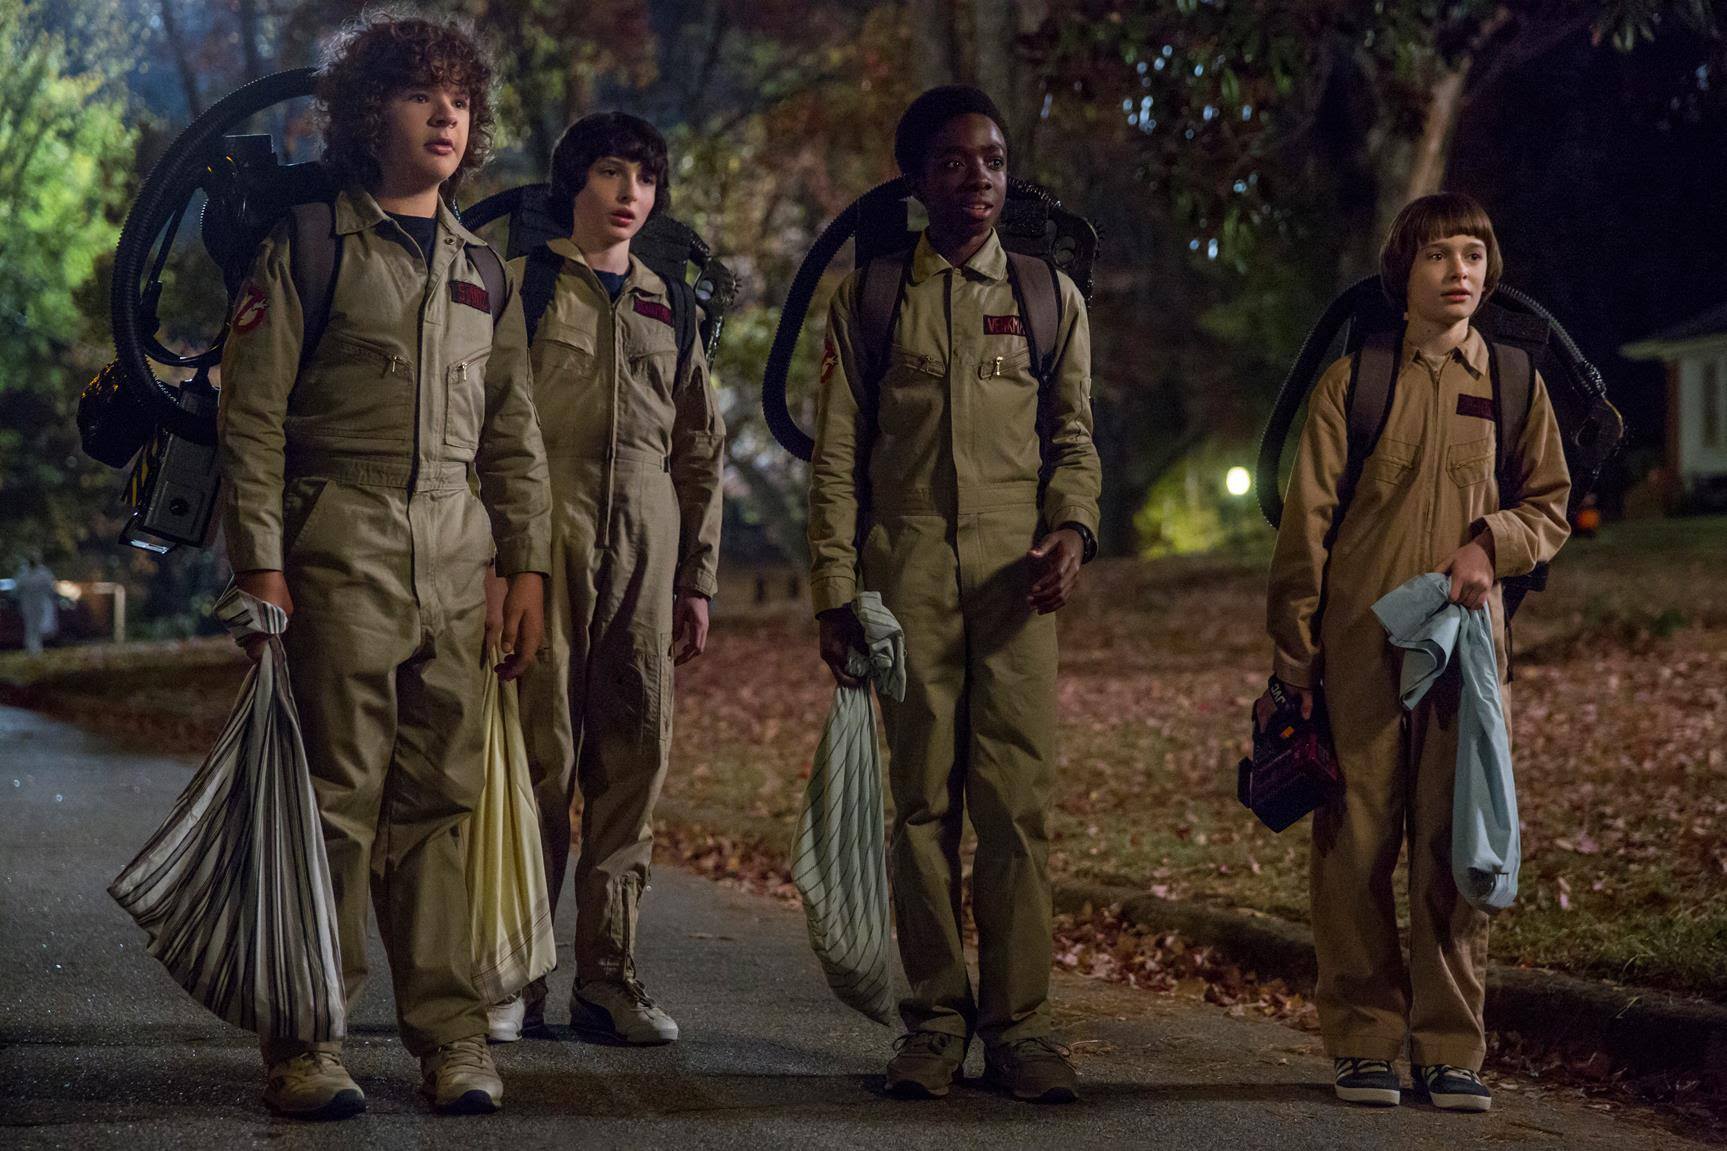 The kids from Stranger Things 2 trick-or-treating as the Ghostbusters